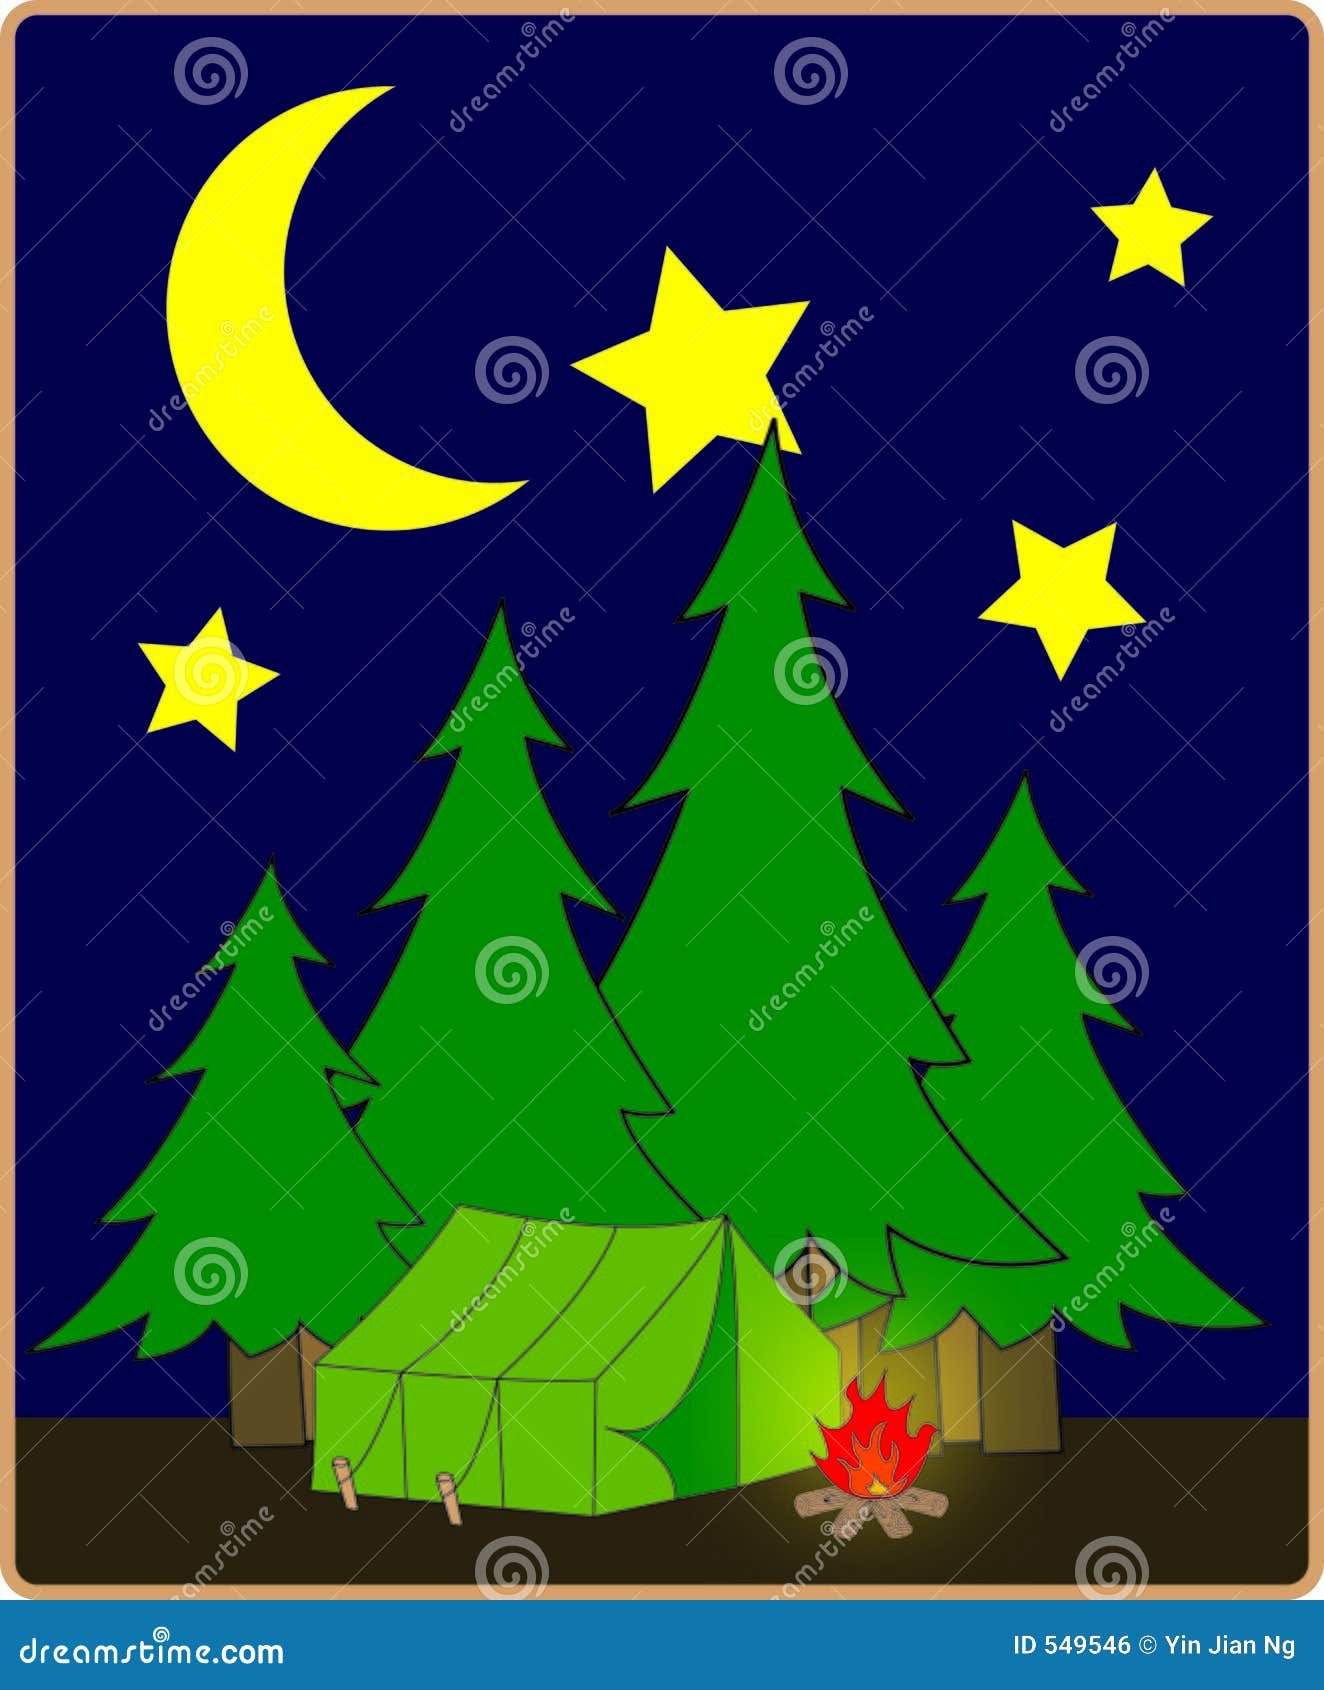 free clipart of night - photo #24